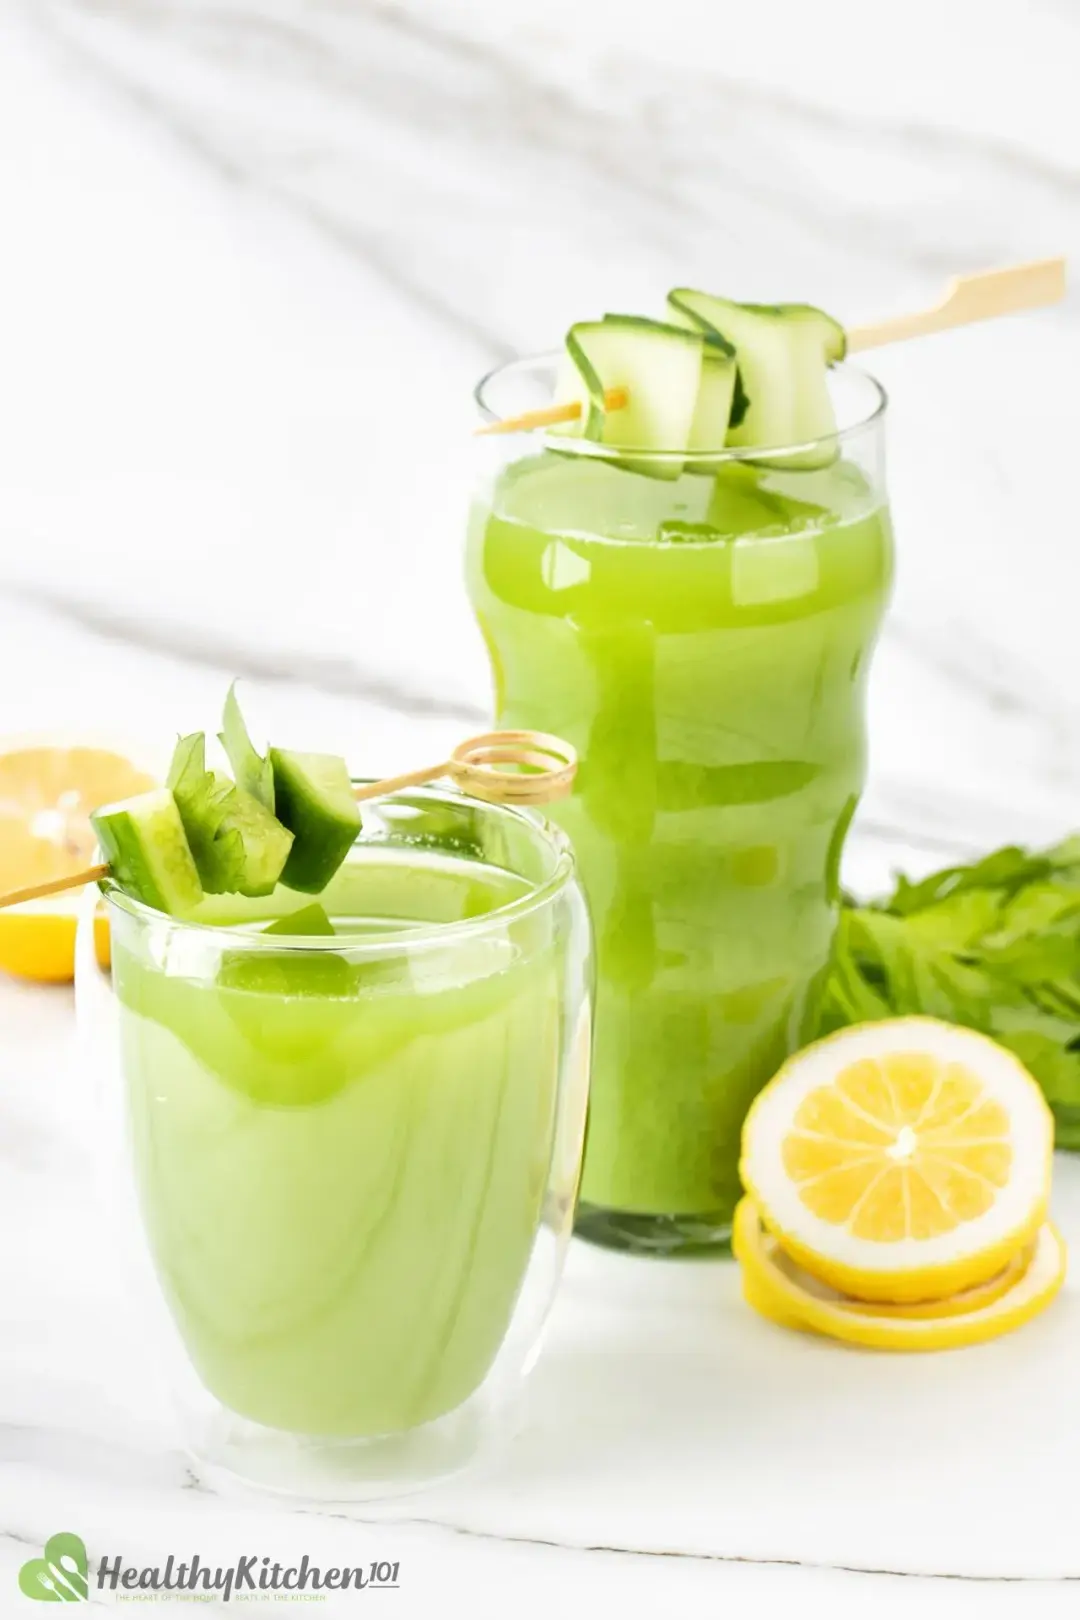 Two glasses of celery cucumber juice, each topped with a skewered strand of cucumber, next to lemon wheels